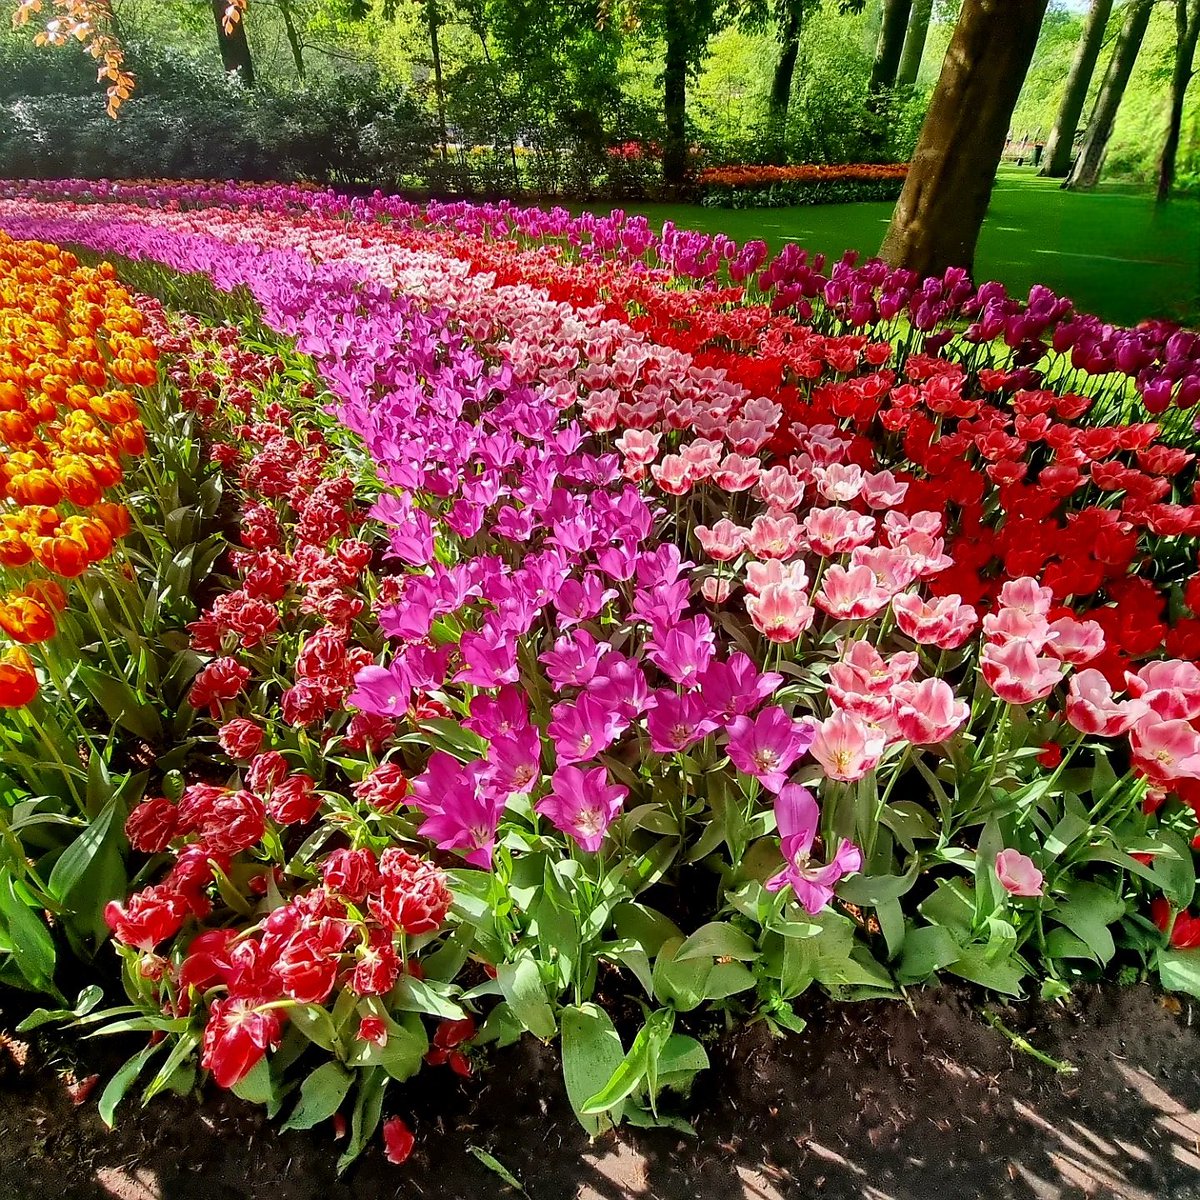 @ArtBooksForAvi I hope this  is ok. Not landscapes but it is nature 😇 Both pictures were taken at  the keukenhof in the netherlands. Beautifull flowershow. When i saw tje dragon first thing i thought of was @Avi_Kaplan @ArtBooksForAvi #landscapesforavi!